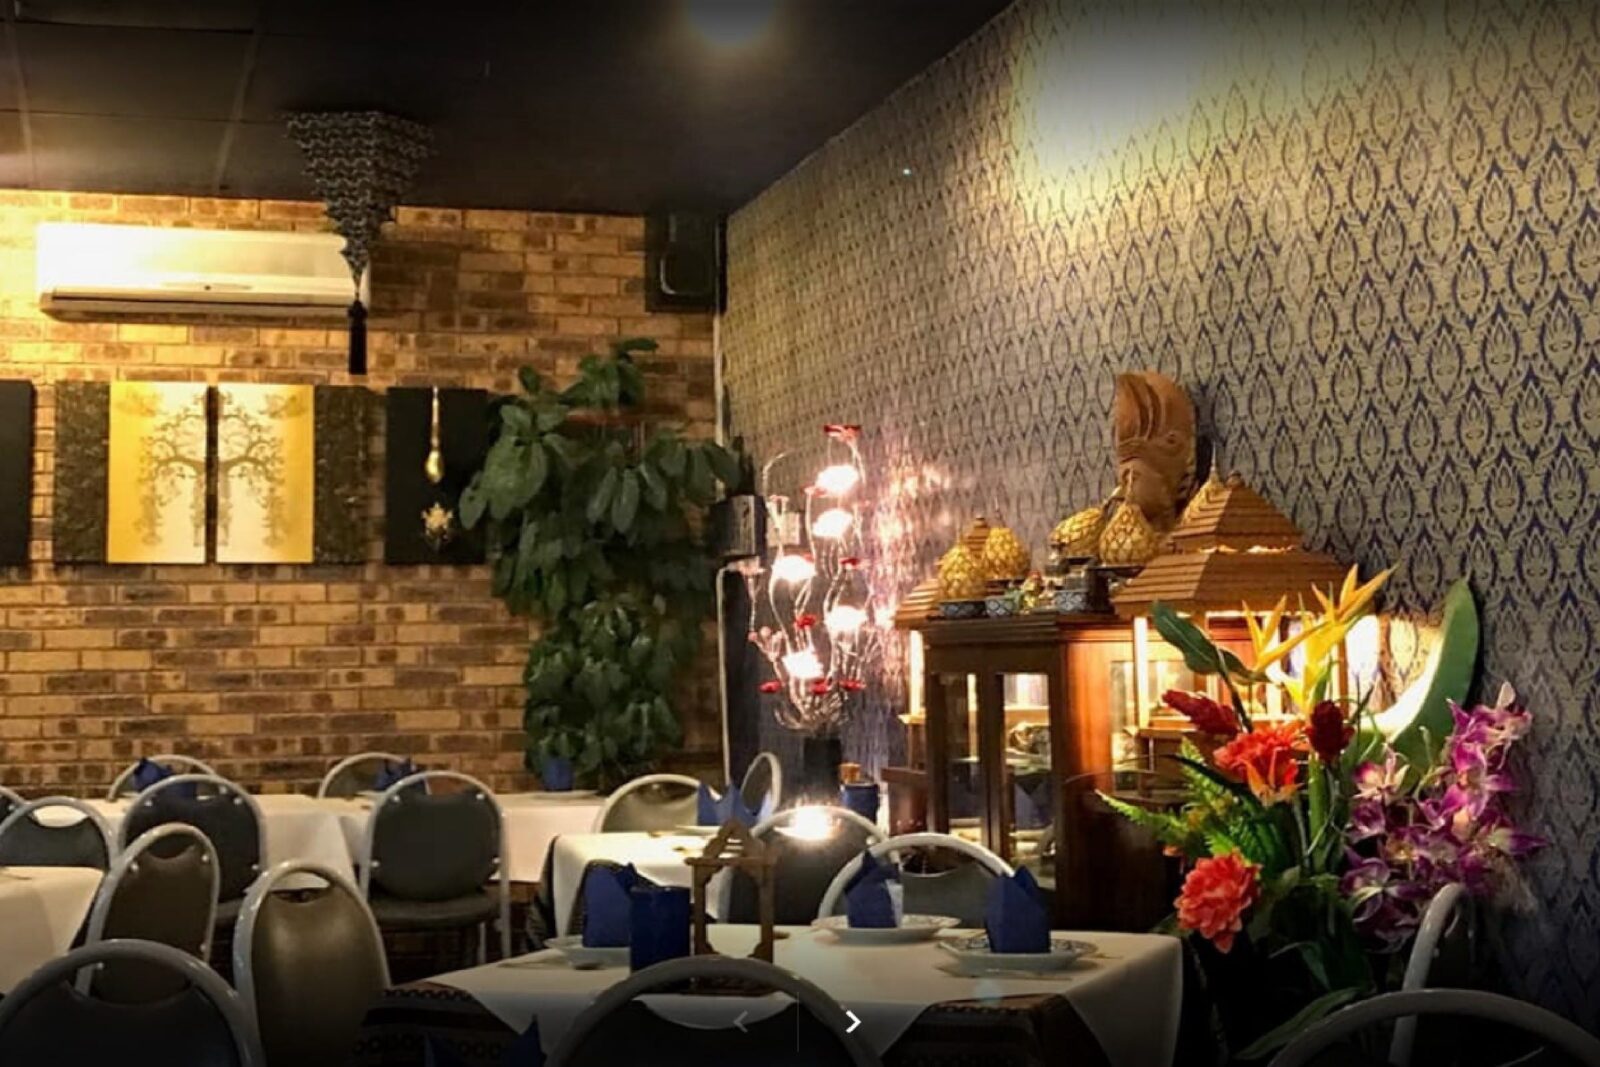 Image of tables and chairs set up ready for service inside Bangkok Thai restaurant